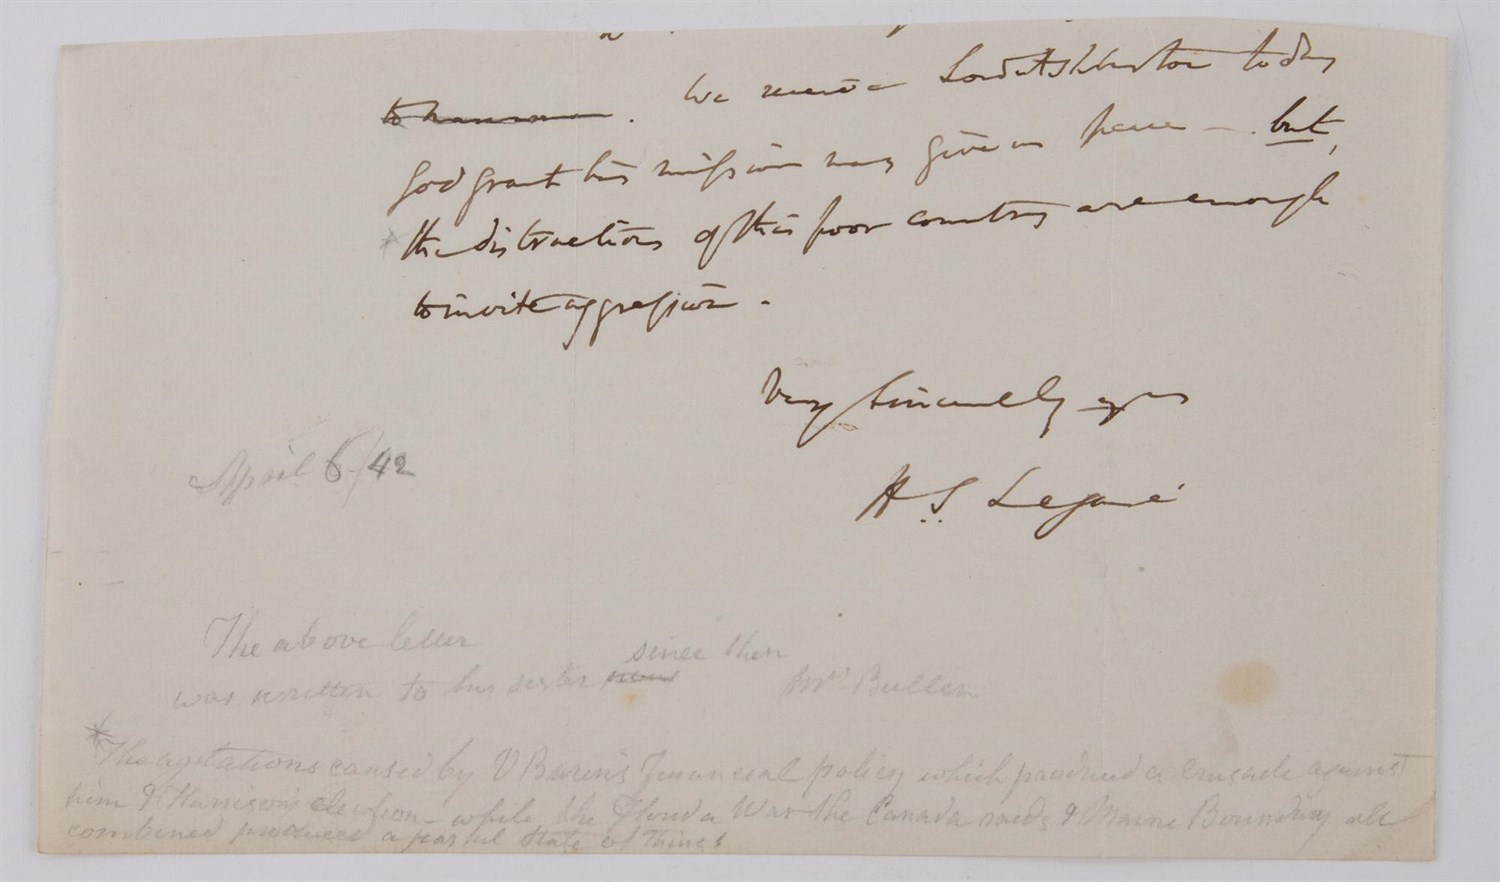 Lot 40 - LEGARE, HUGH SWINTON, as Attorney General of the U.S. Clipped closing of a letter with signature.